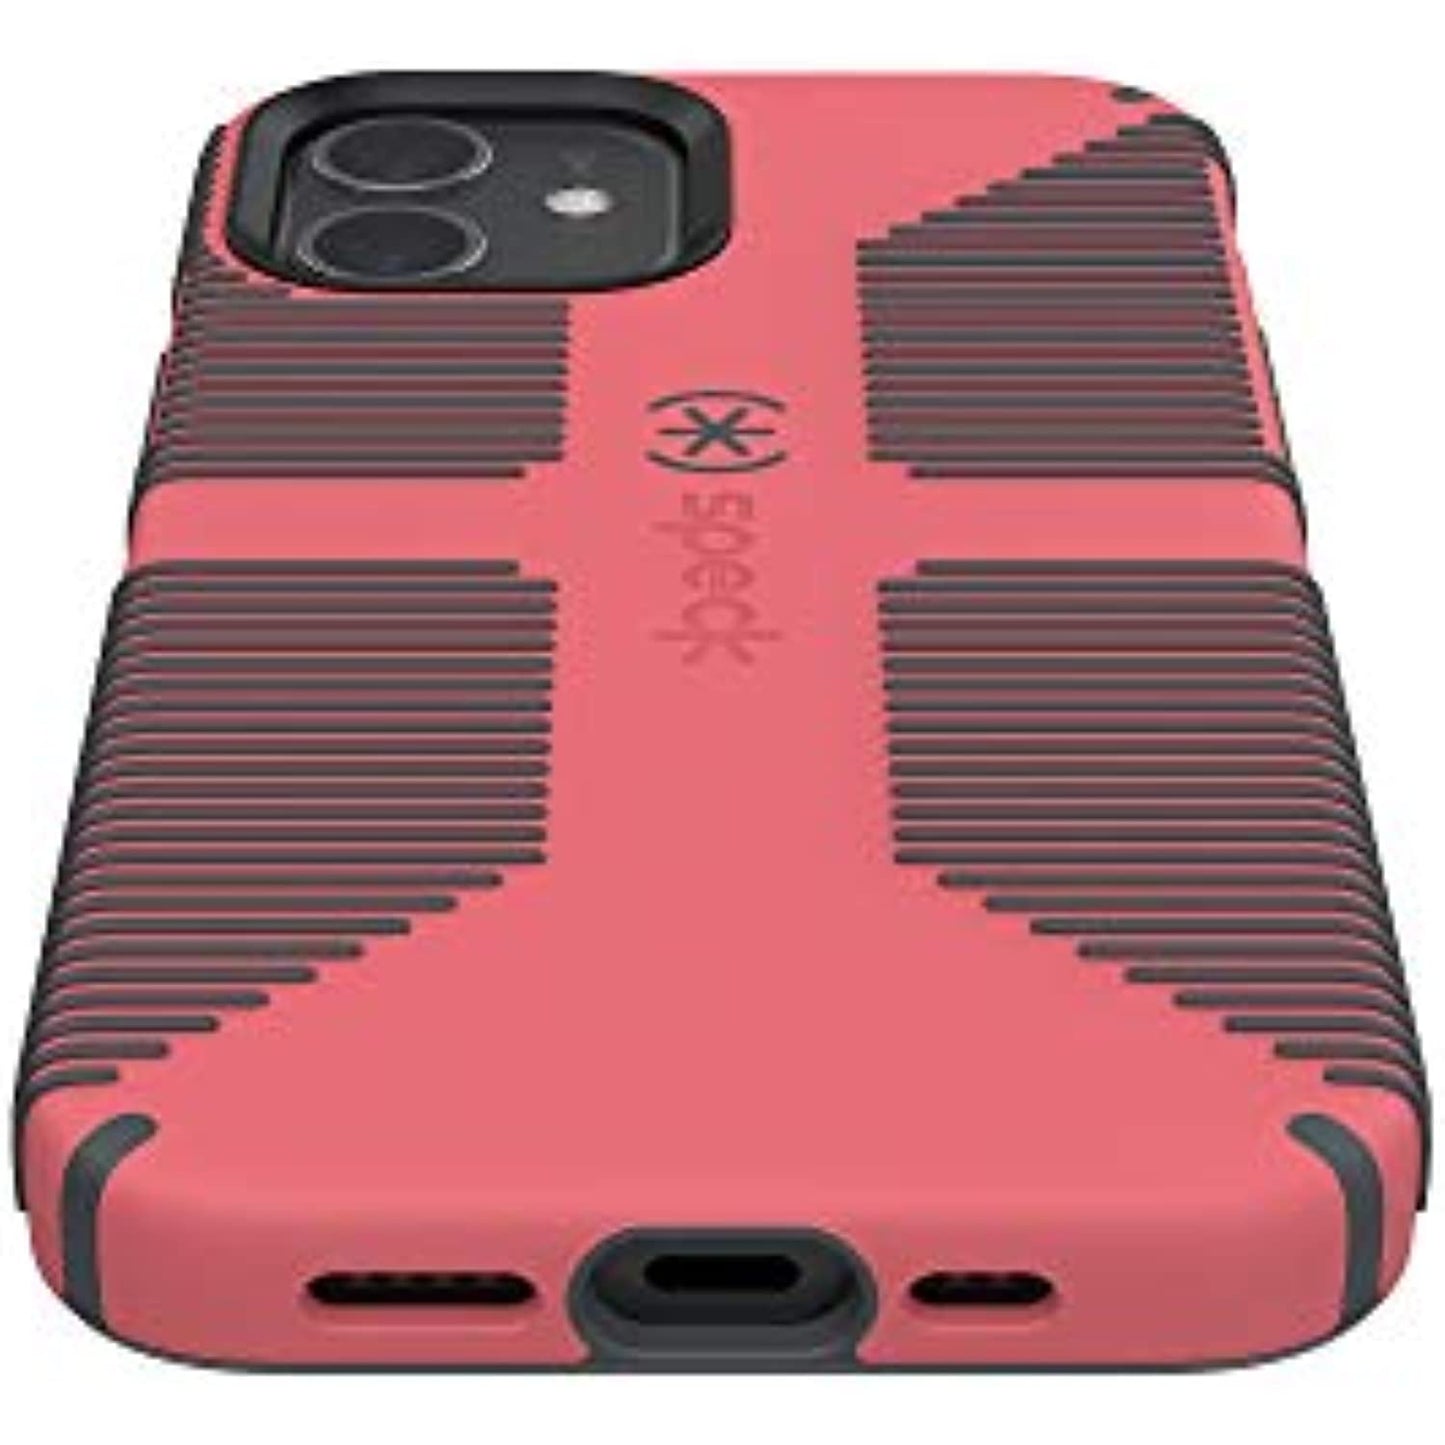 Speck Products CandyShell Pro Grip iPhone 12, iPhone 12 Pro Case, Raspberry Kiss Red/Slate Grey (137602-9240)